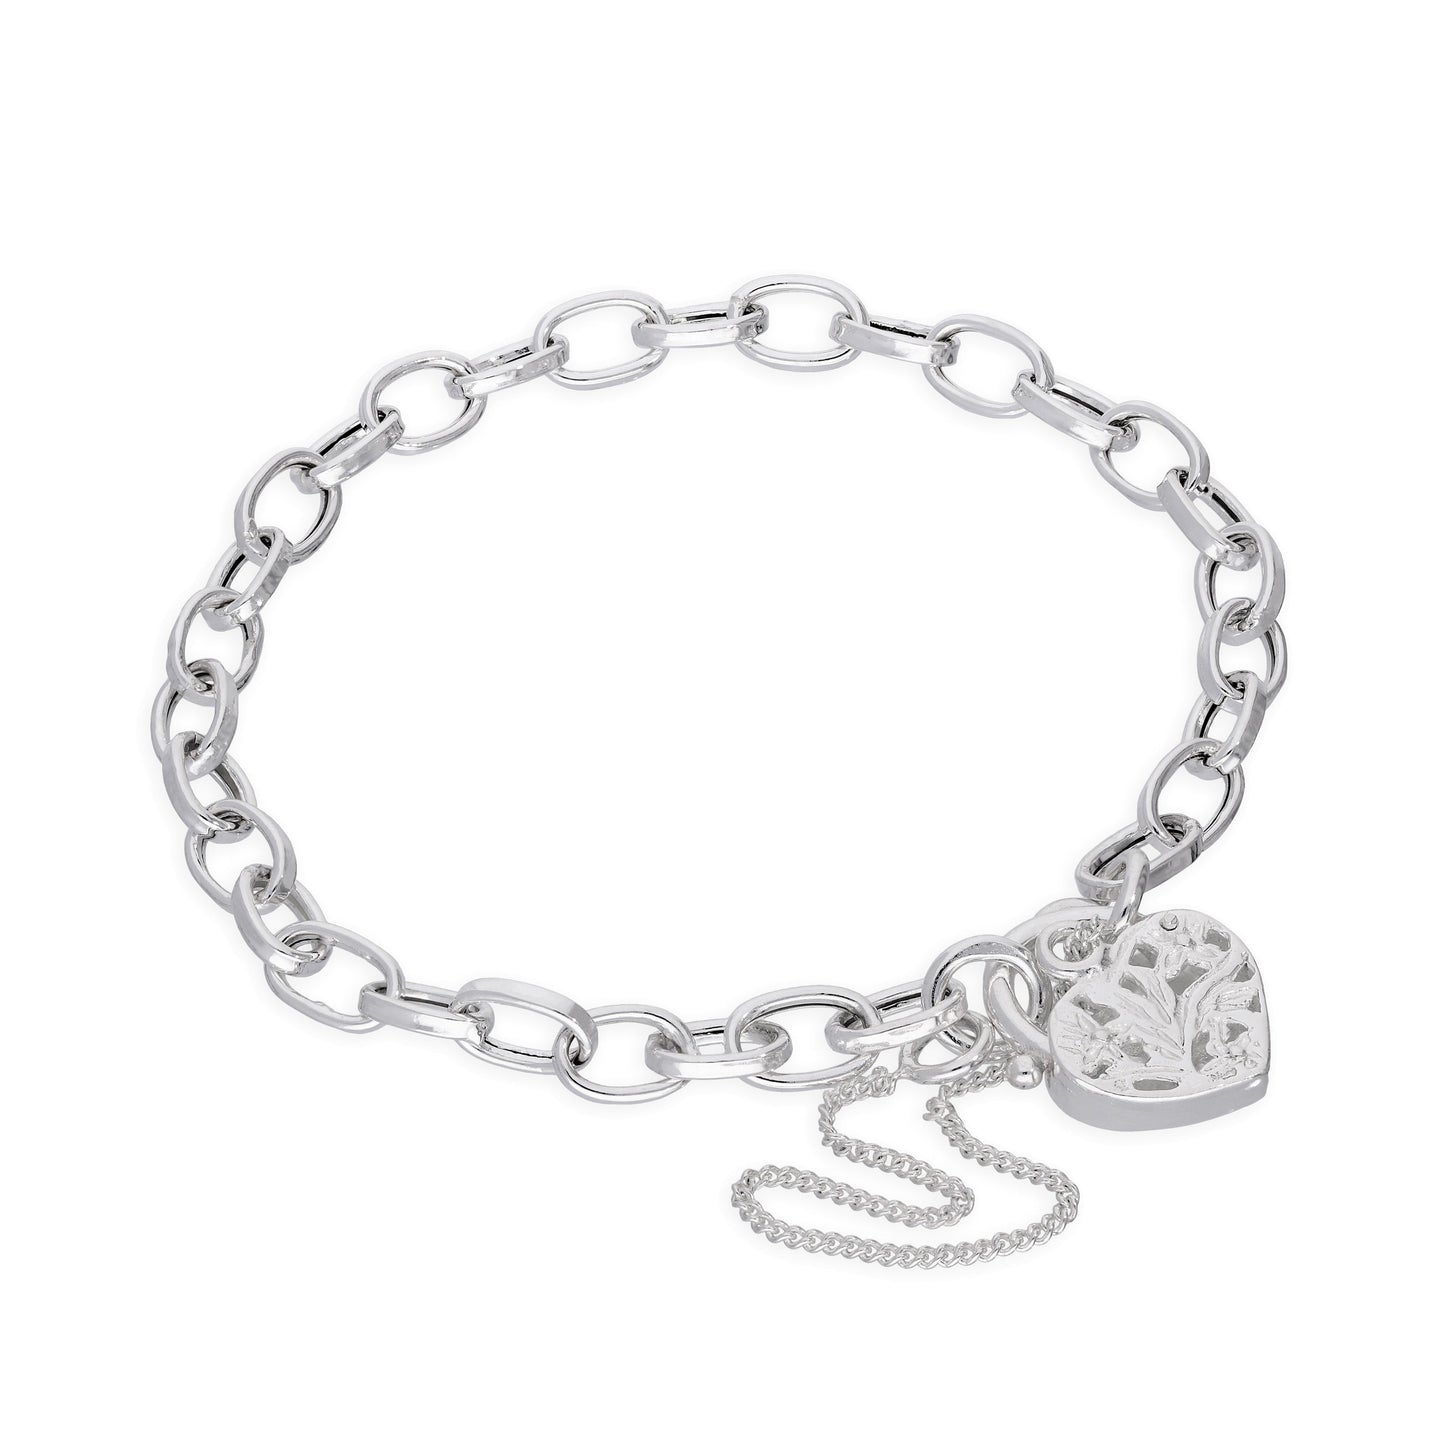 Sterling Silver Belcher Chain Charm Bracelet with Heart Padlock 6 Inches - 8 Inches